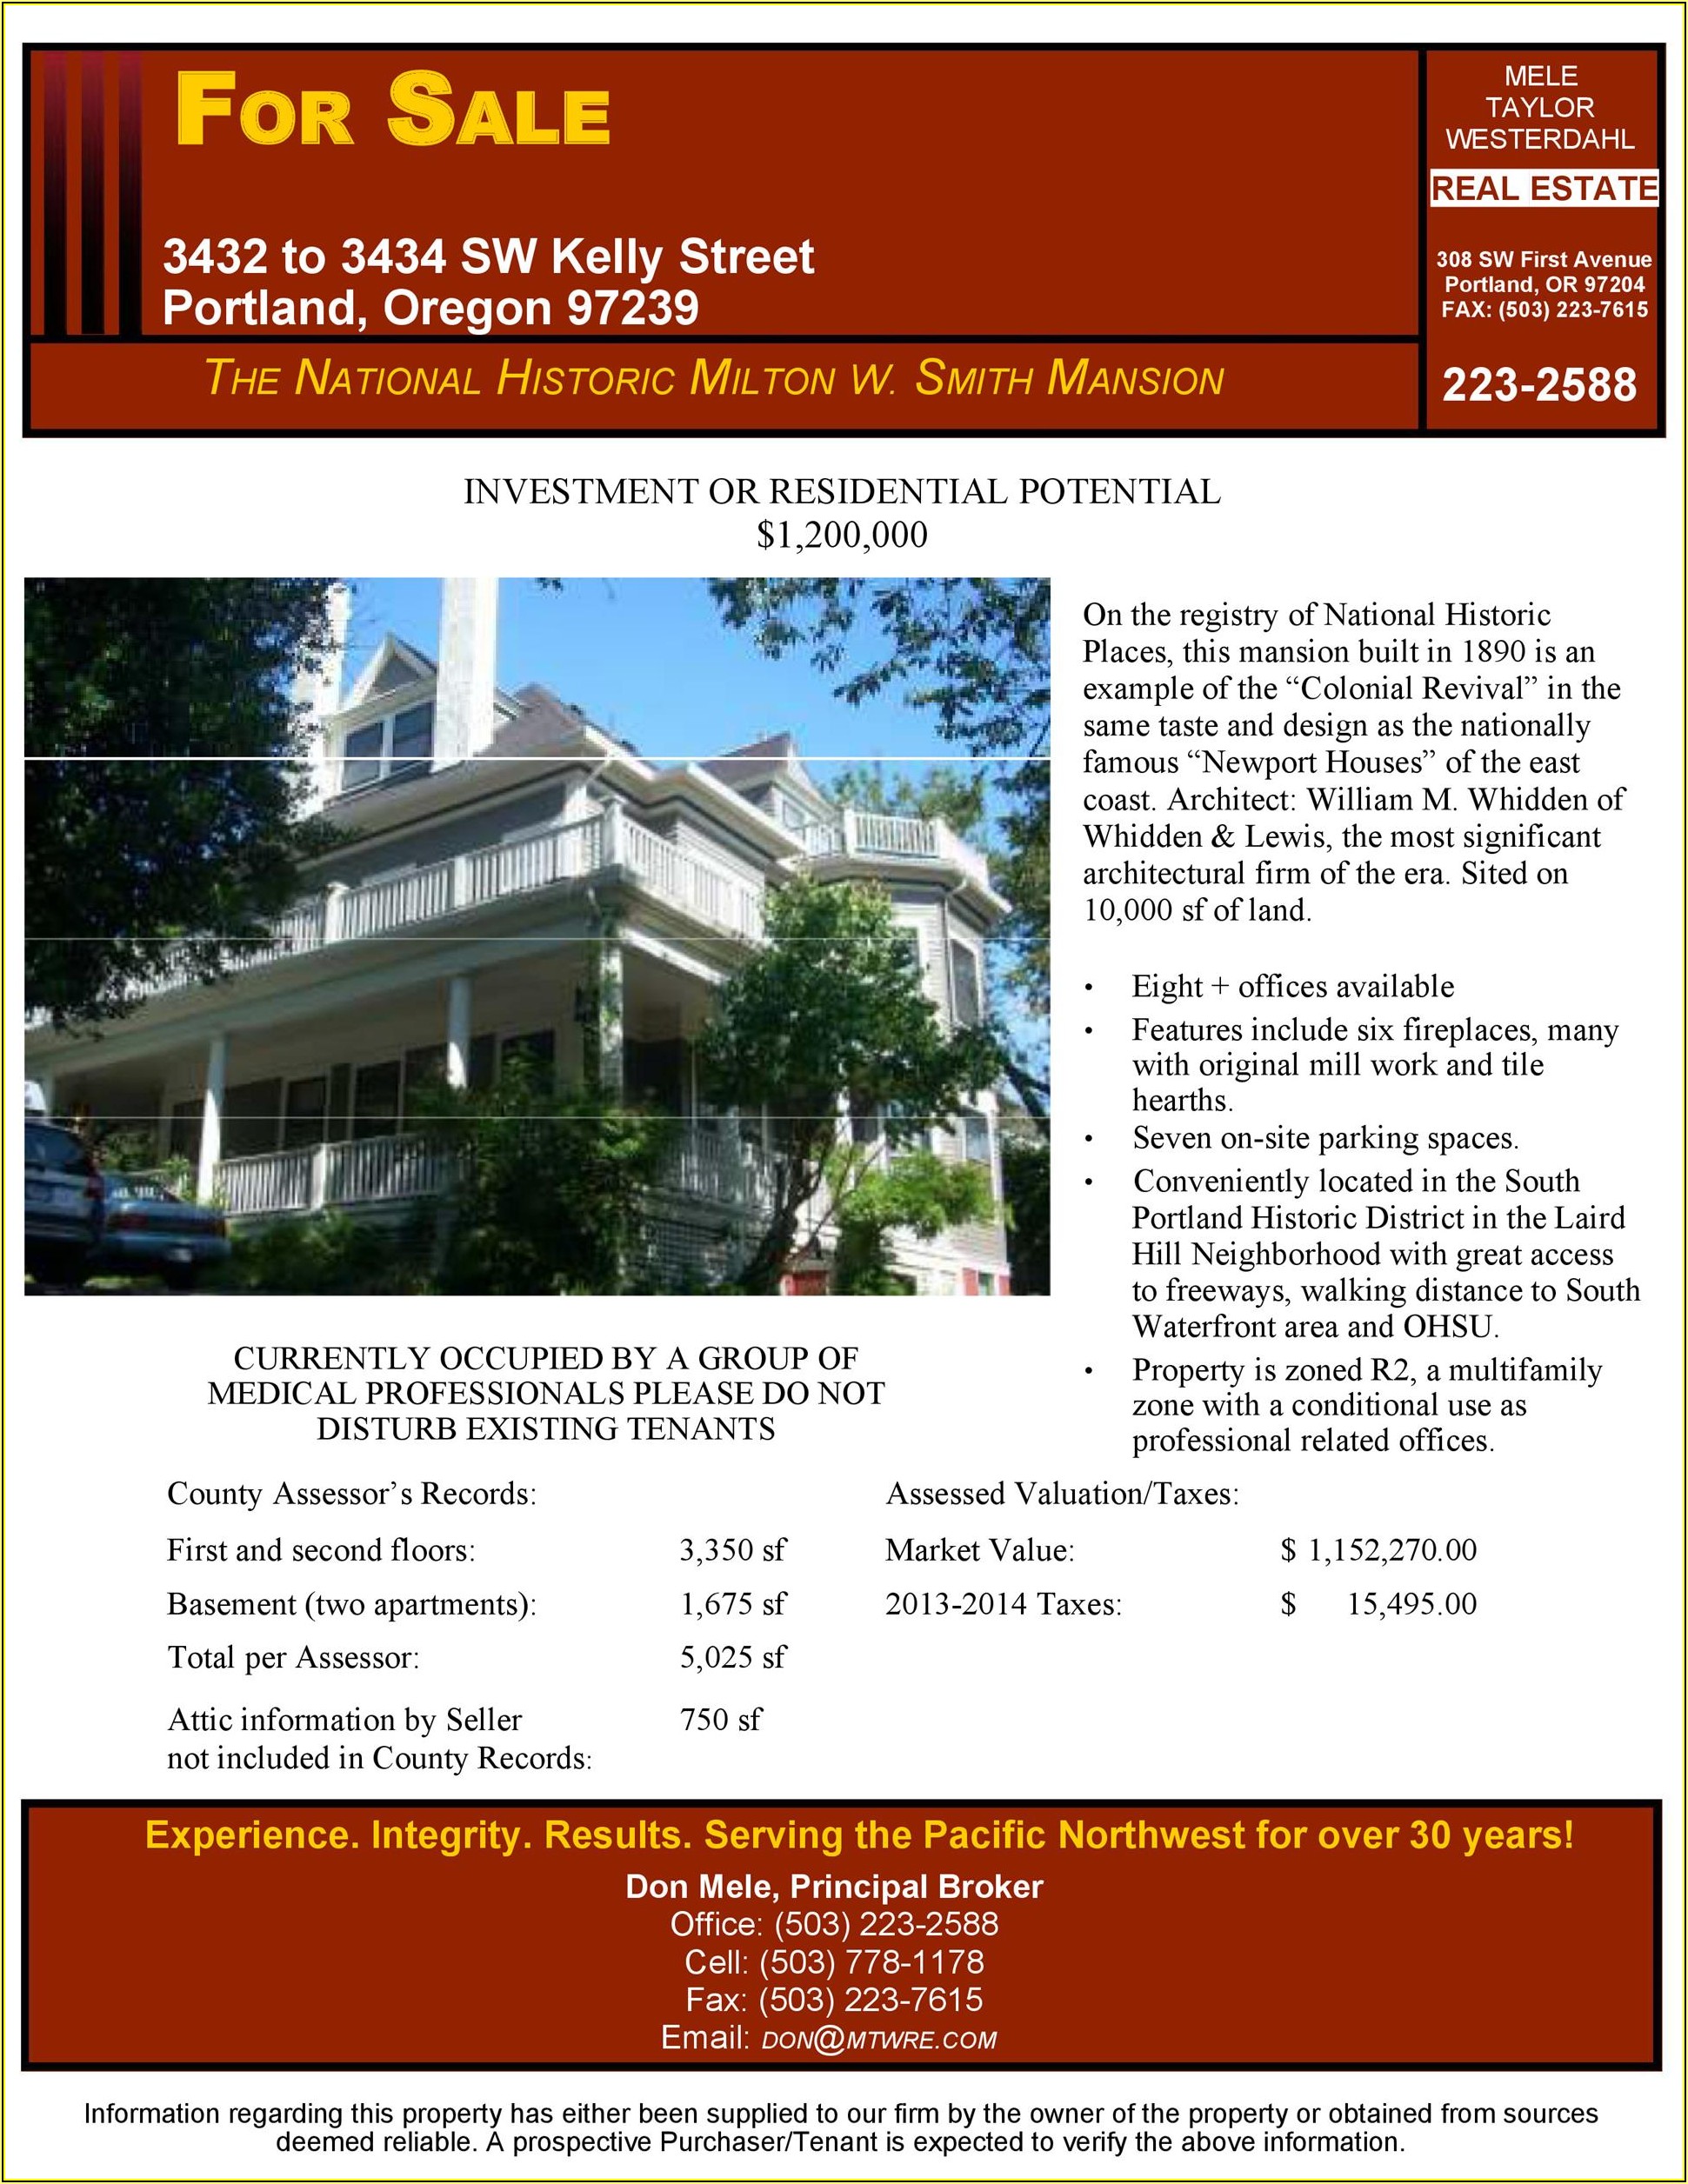 House For Sale Flyer Example